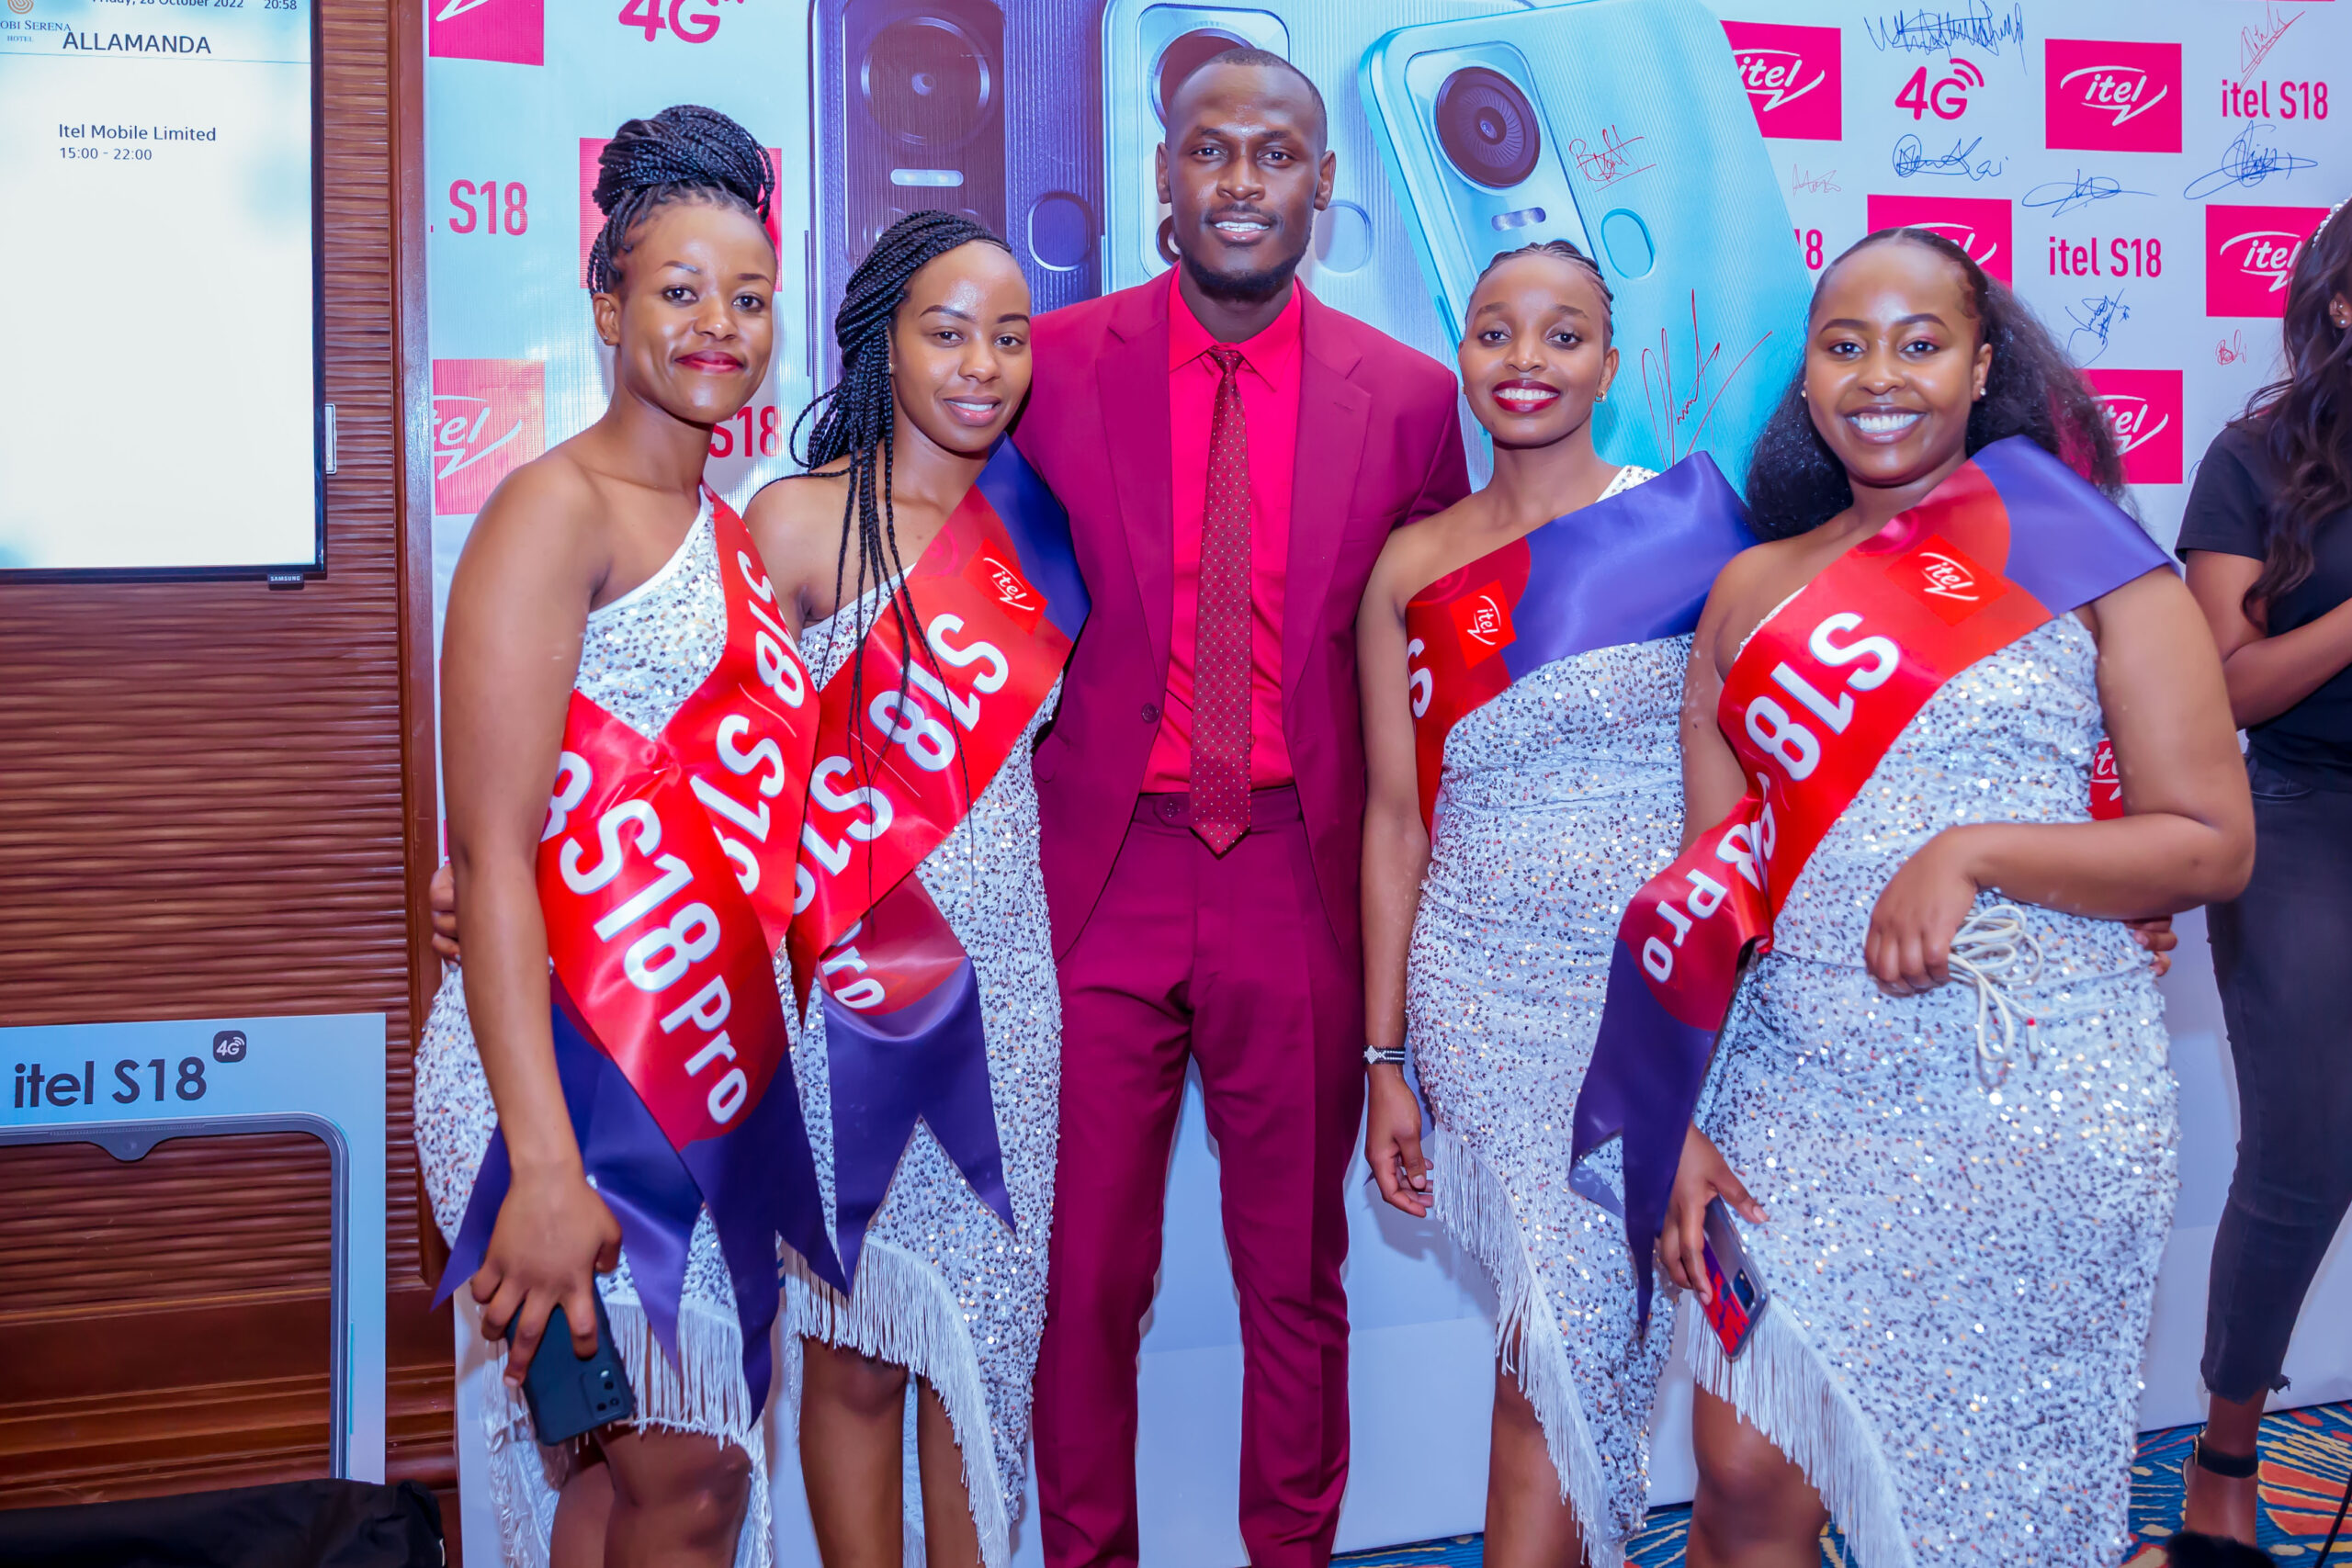 Itel Kenya Launches The Highly Ranked Itel S18